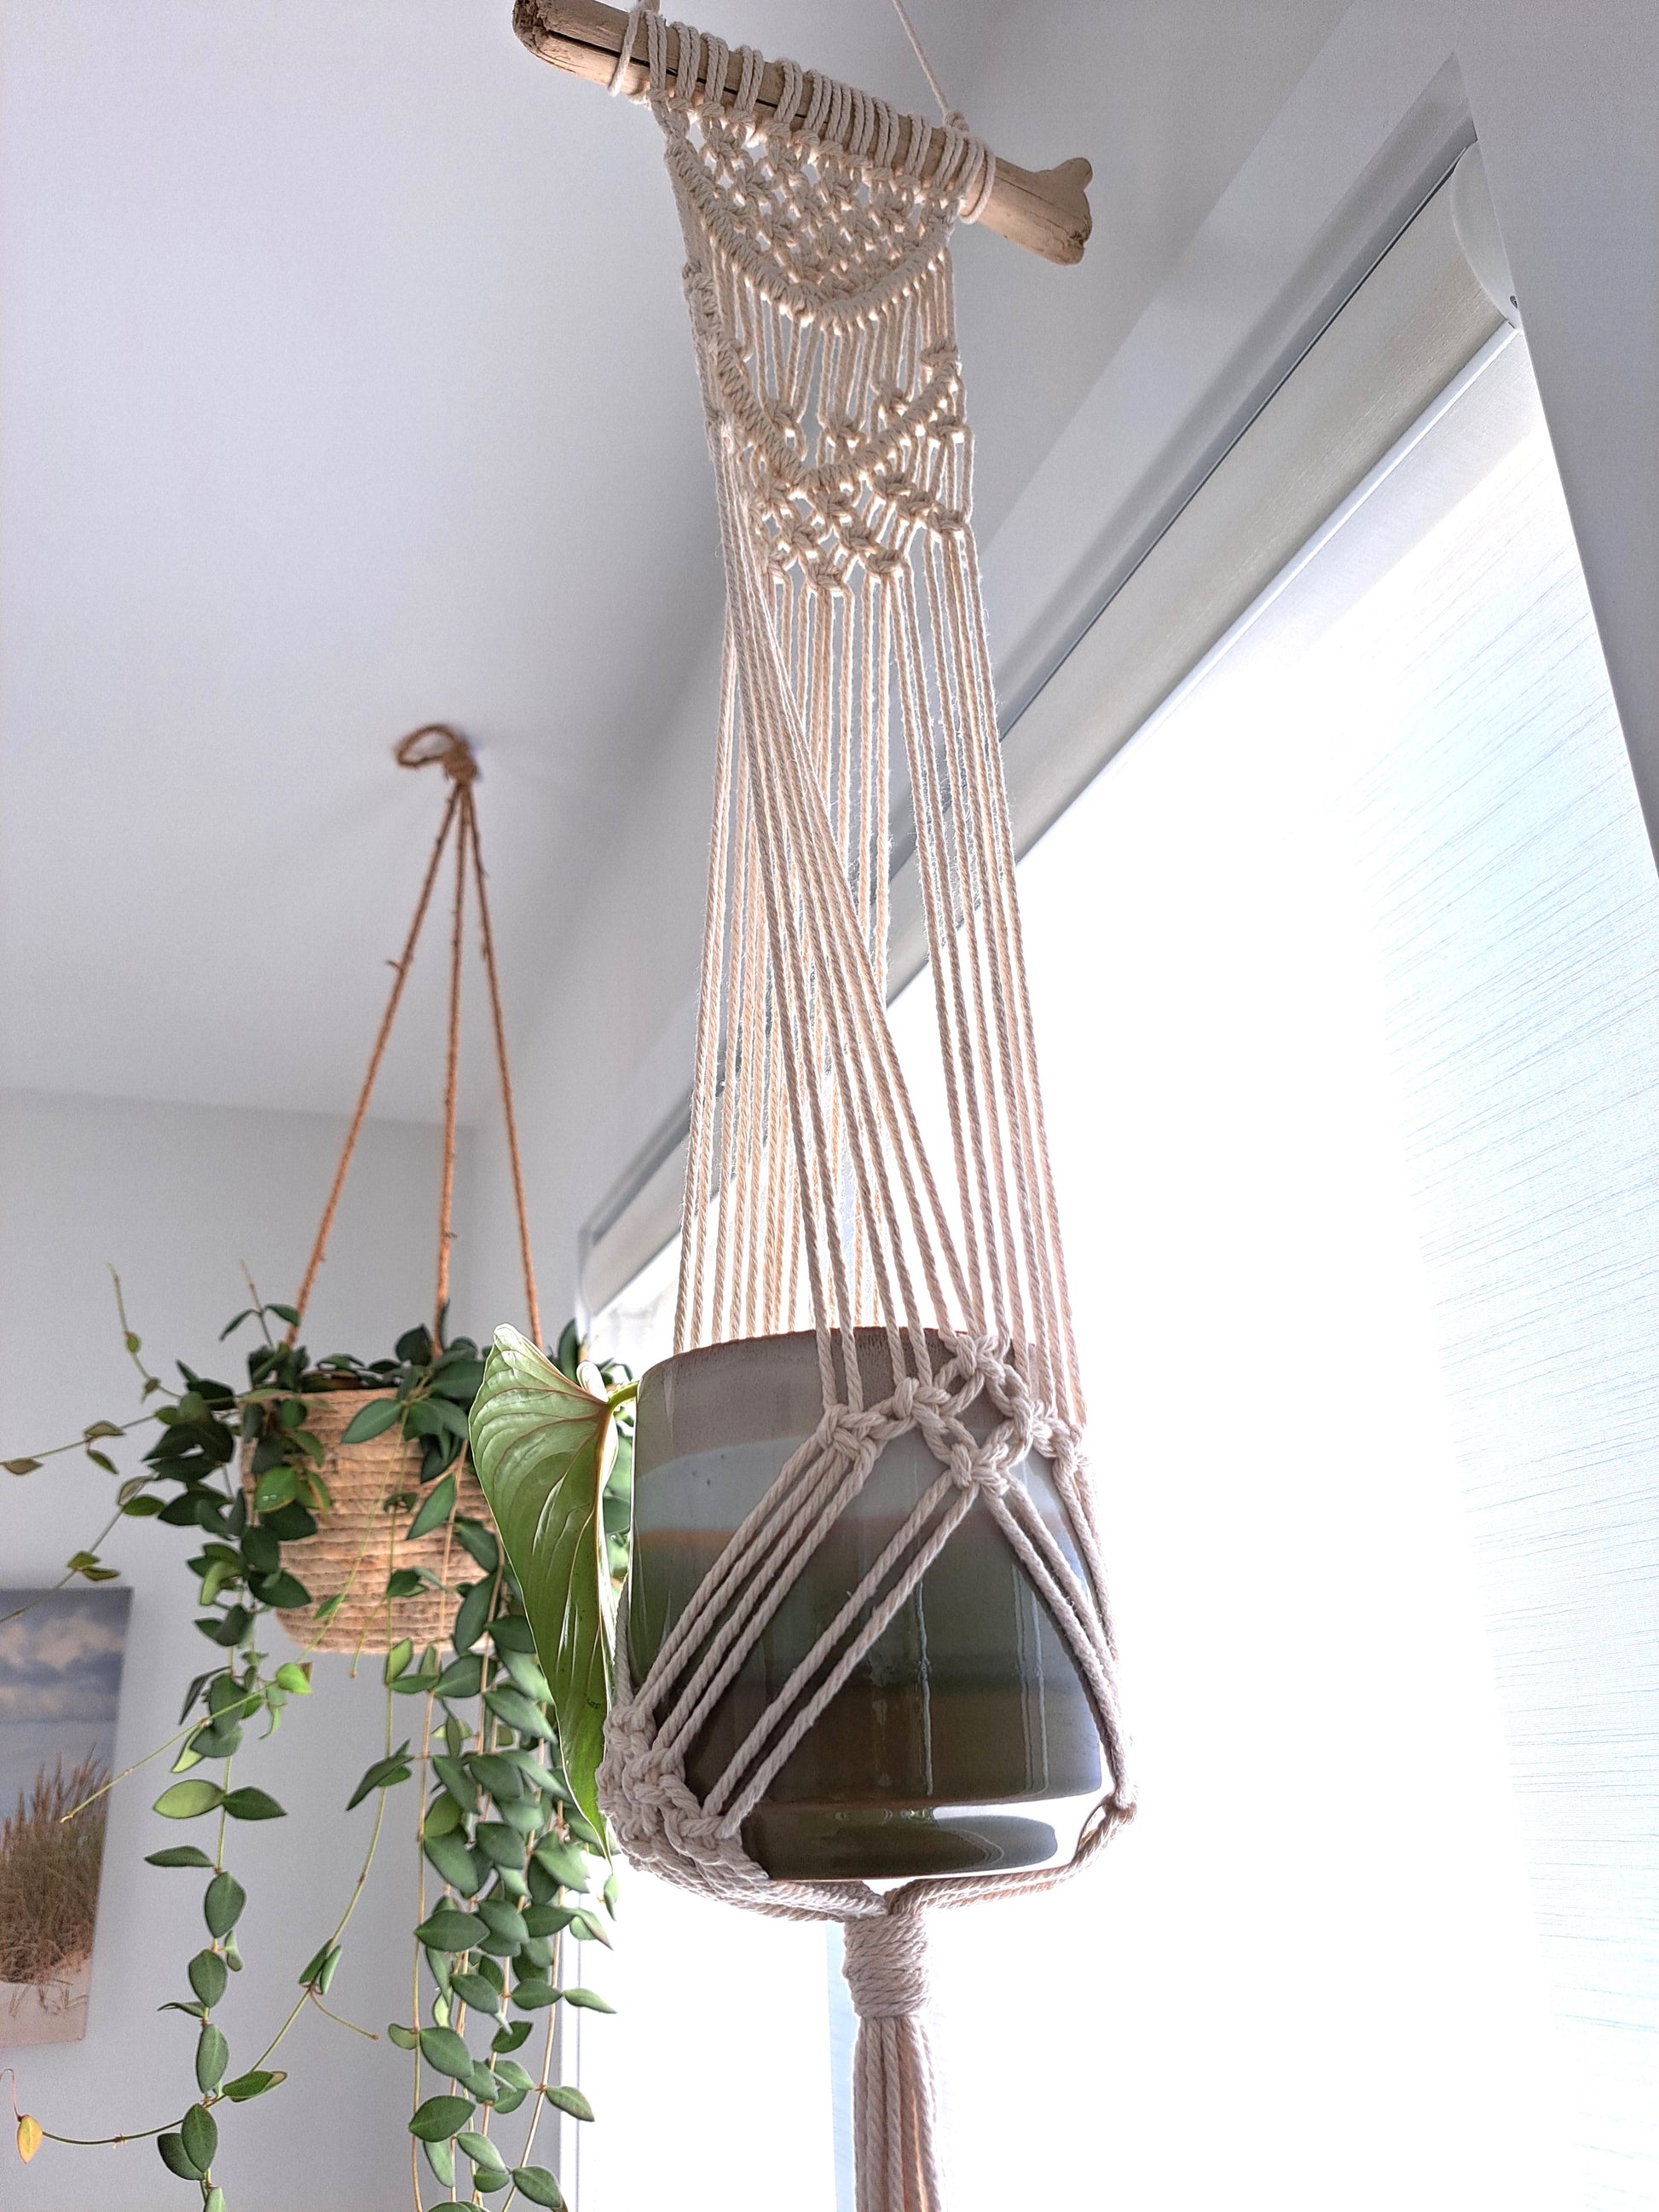 Weathered Landing's handmade driftwood macrame plant hanger that fits a 4 inch pot best. Display your hanging plants in this intricate boho plant hanger. Adds texture and natural elements to your space. Located in Komoka. Shipping to Canada and US.